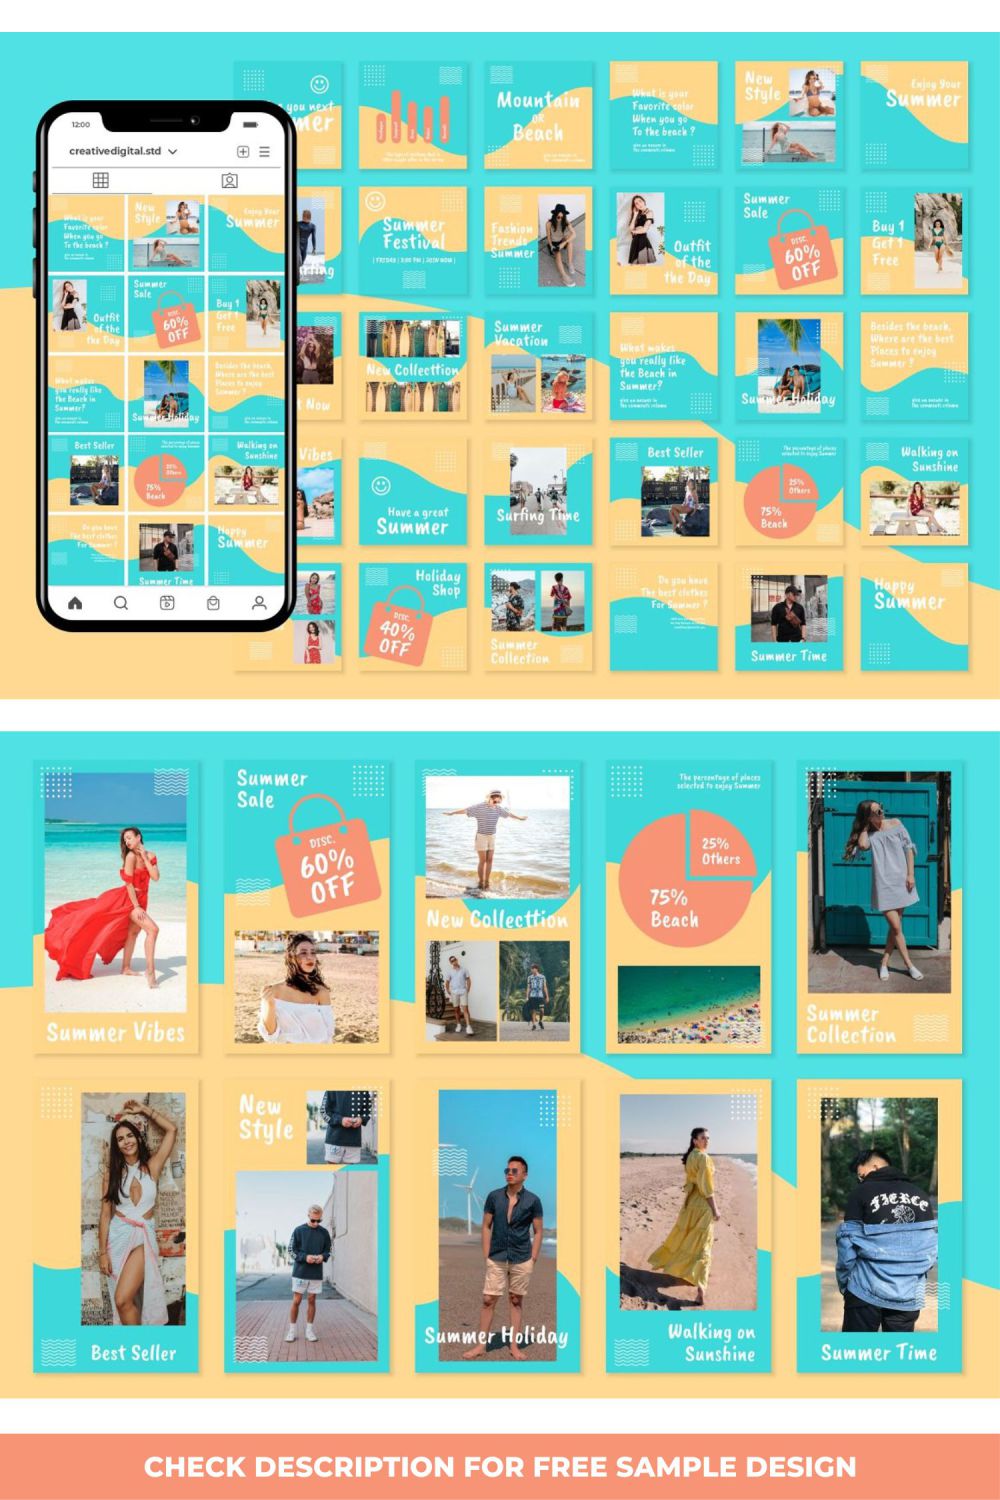 Summer Fashion Marketing Story And Post Social Media Template Pinterest Image.